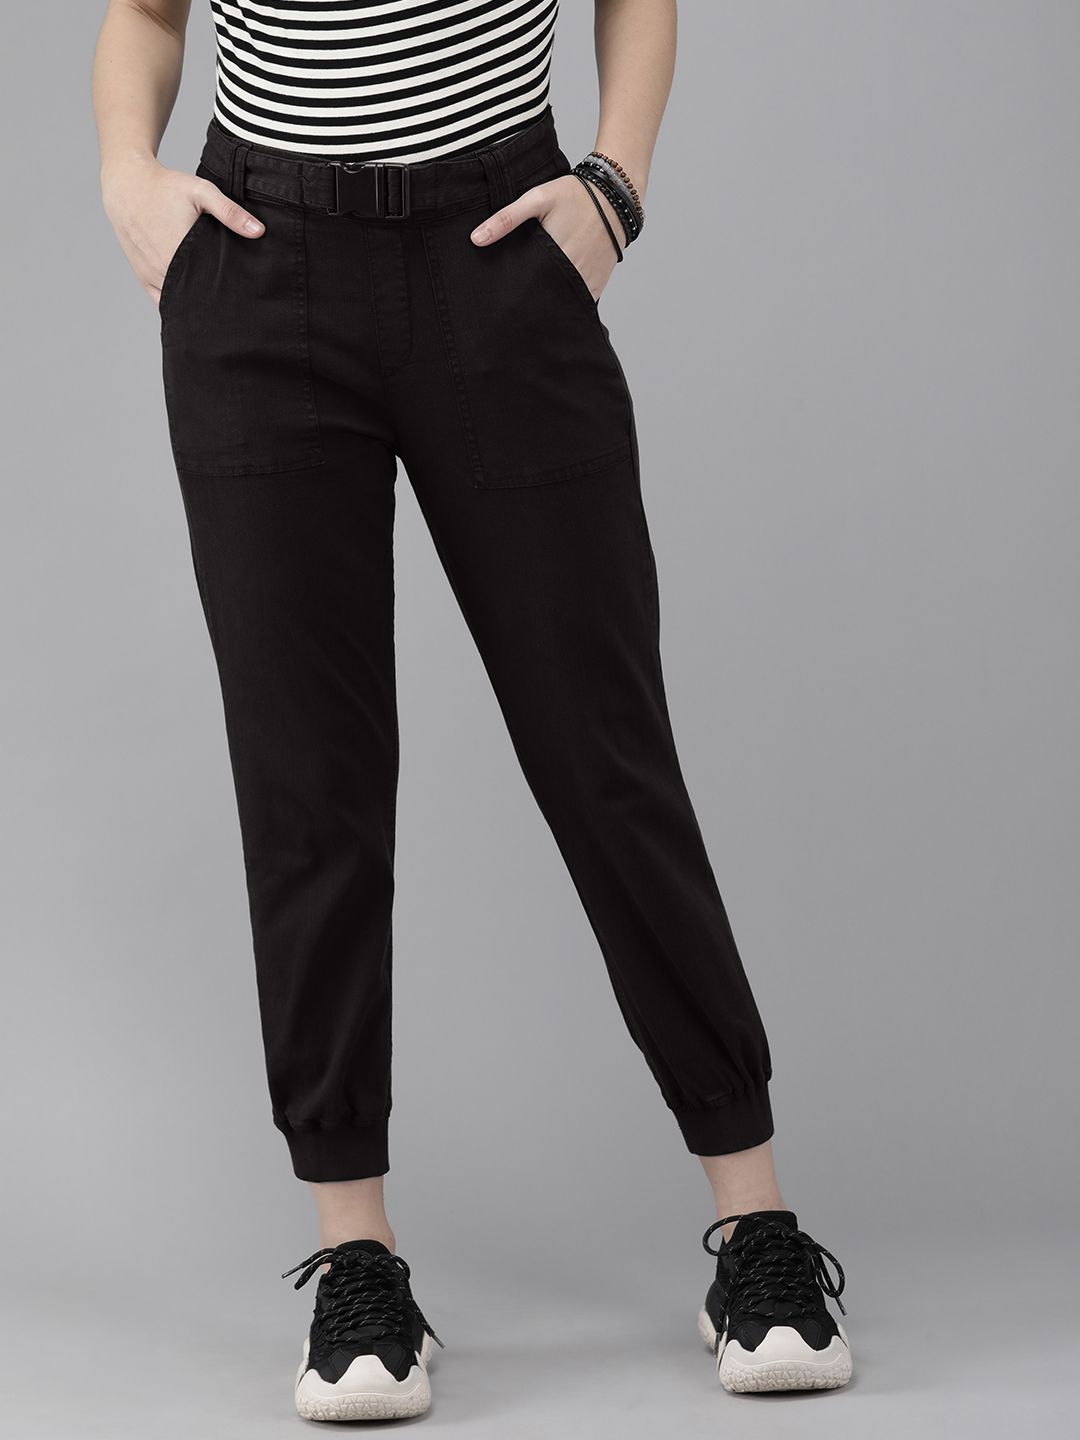 Roadster Women Black Solid Joggers Trousers Price in India